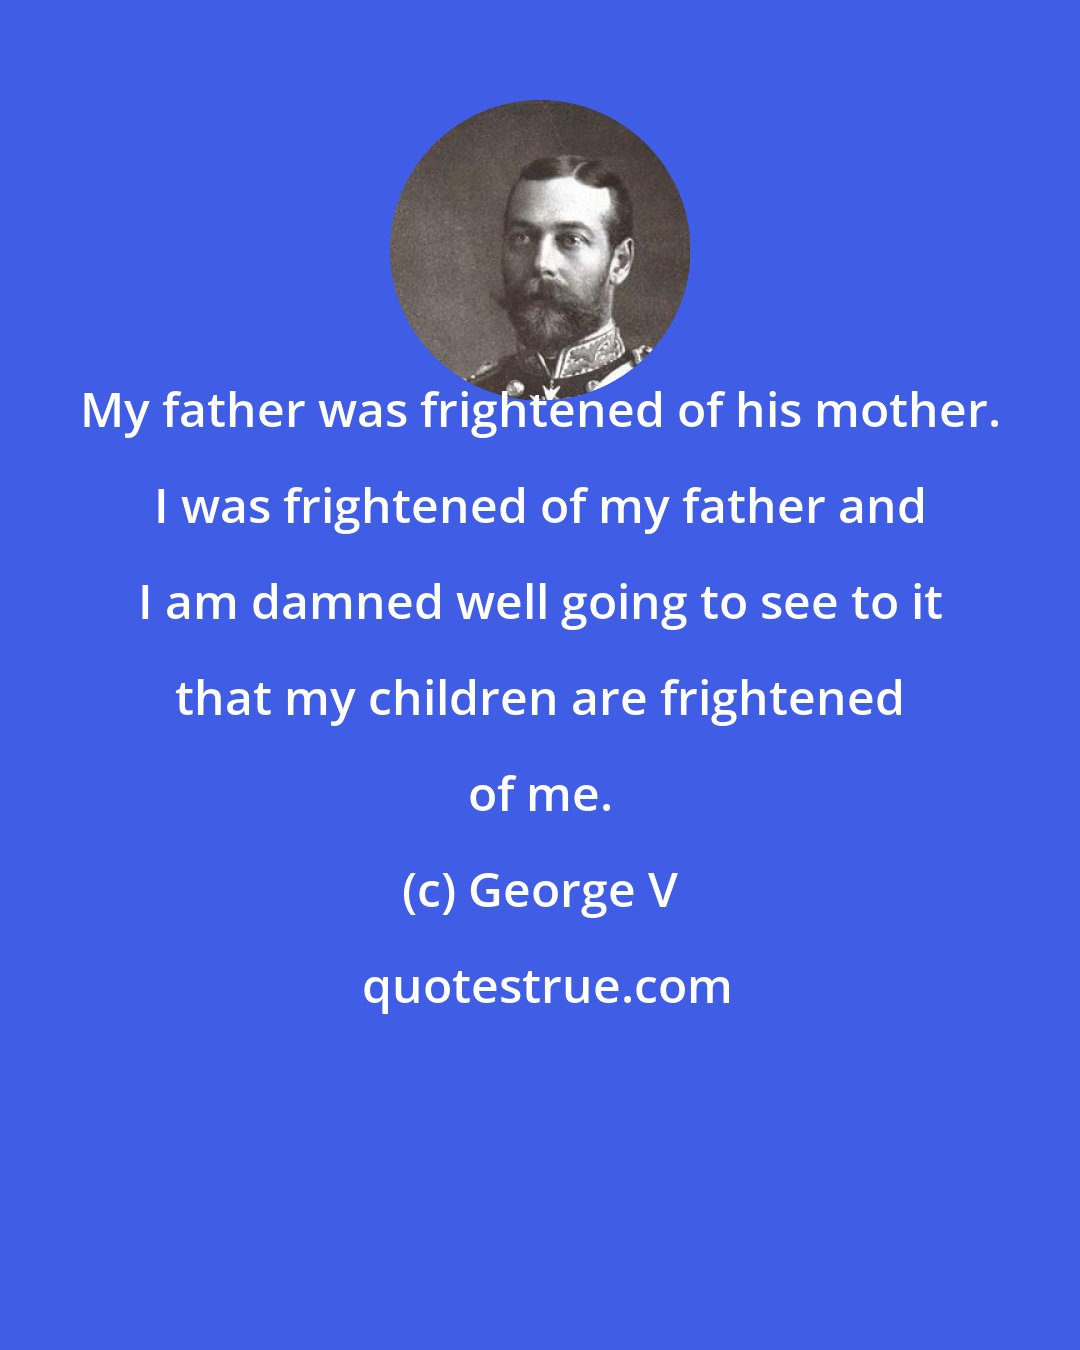 George V: My father was frightened of his mother. I was frightened of my father and I am damned well going to see to it that my children are frightened of me.